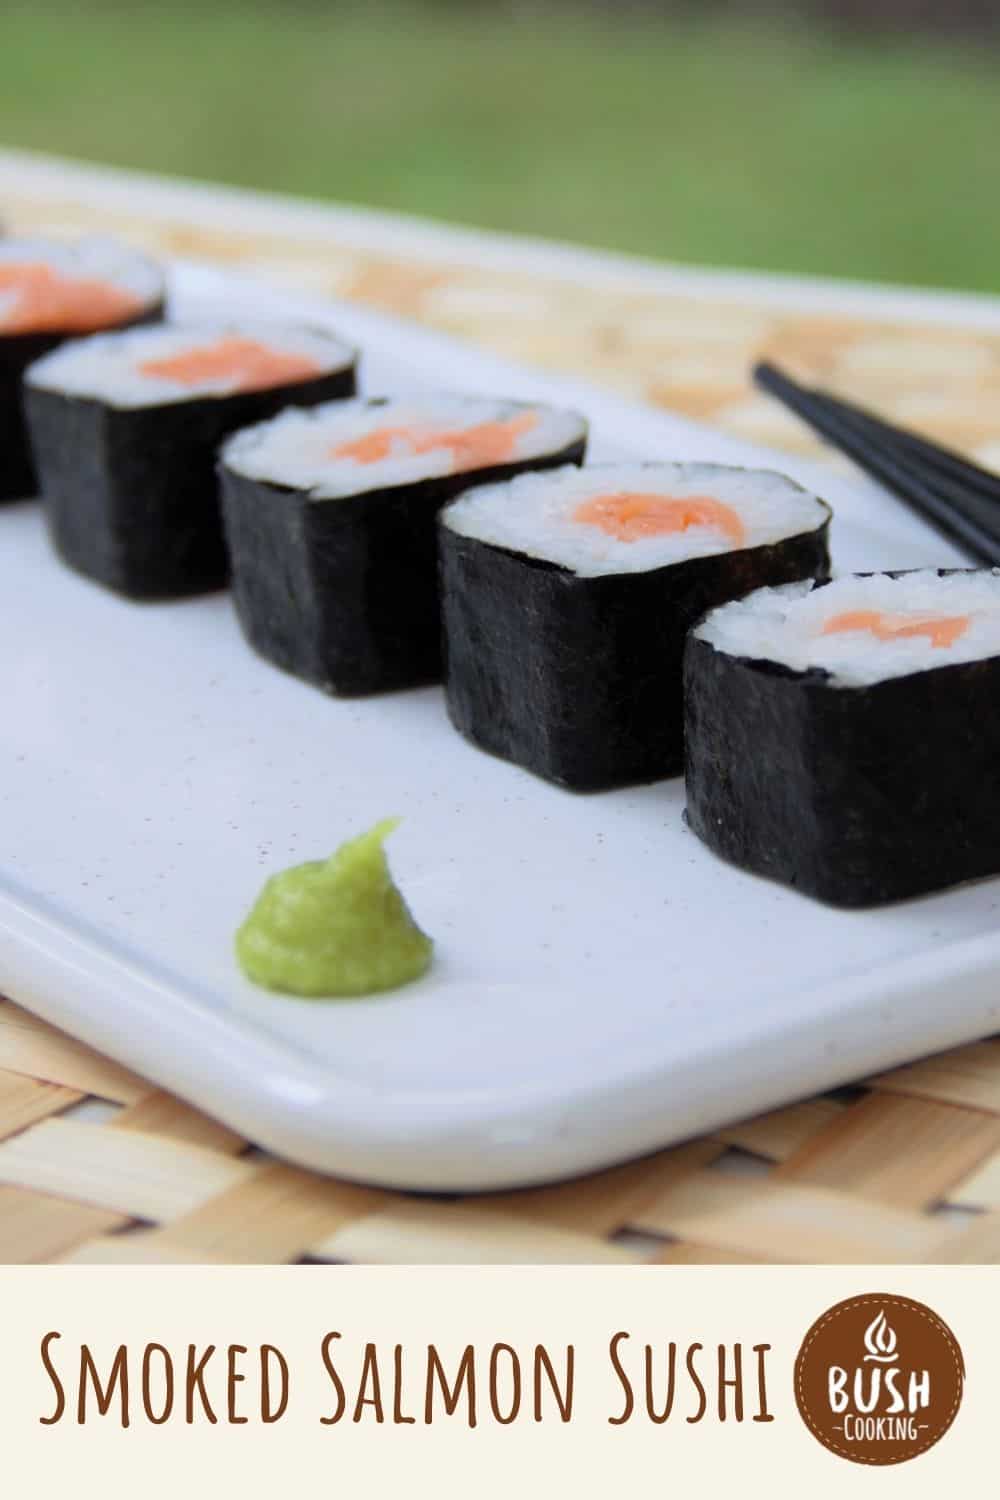 Big sushi set made of fresh vegetables and seafood Stock Photo by